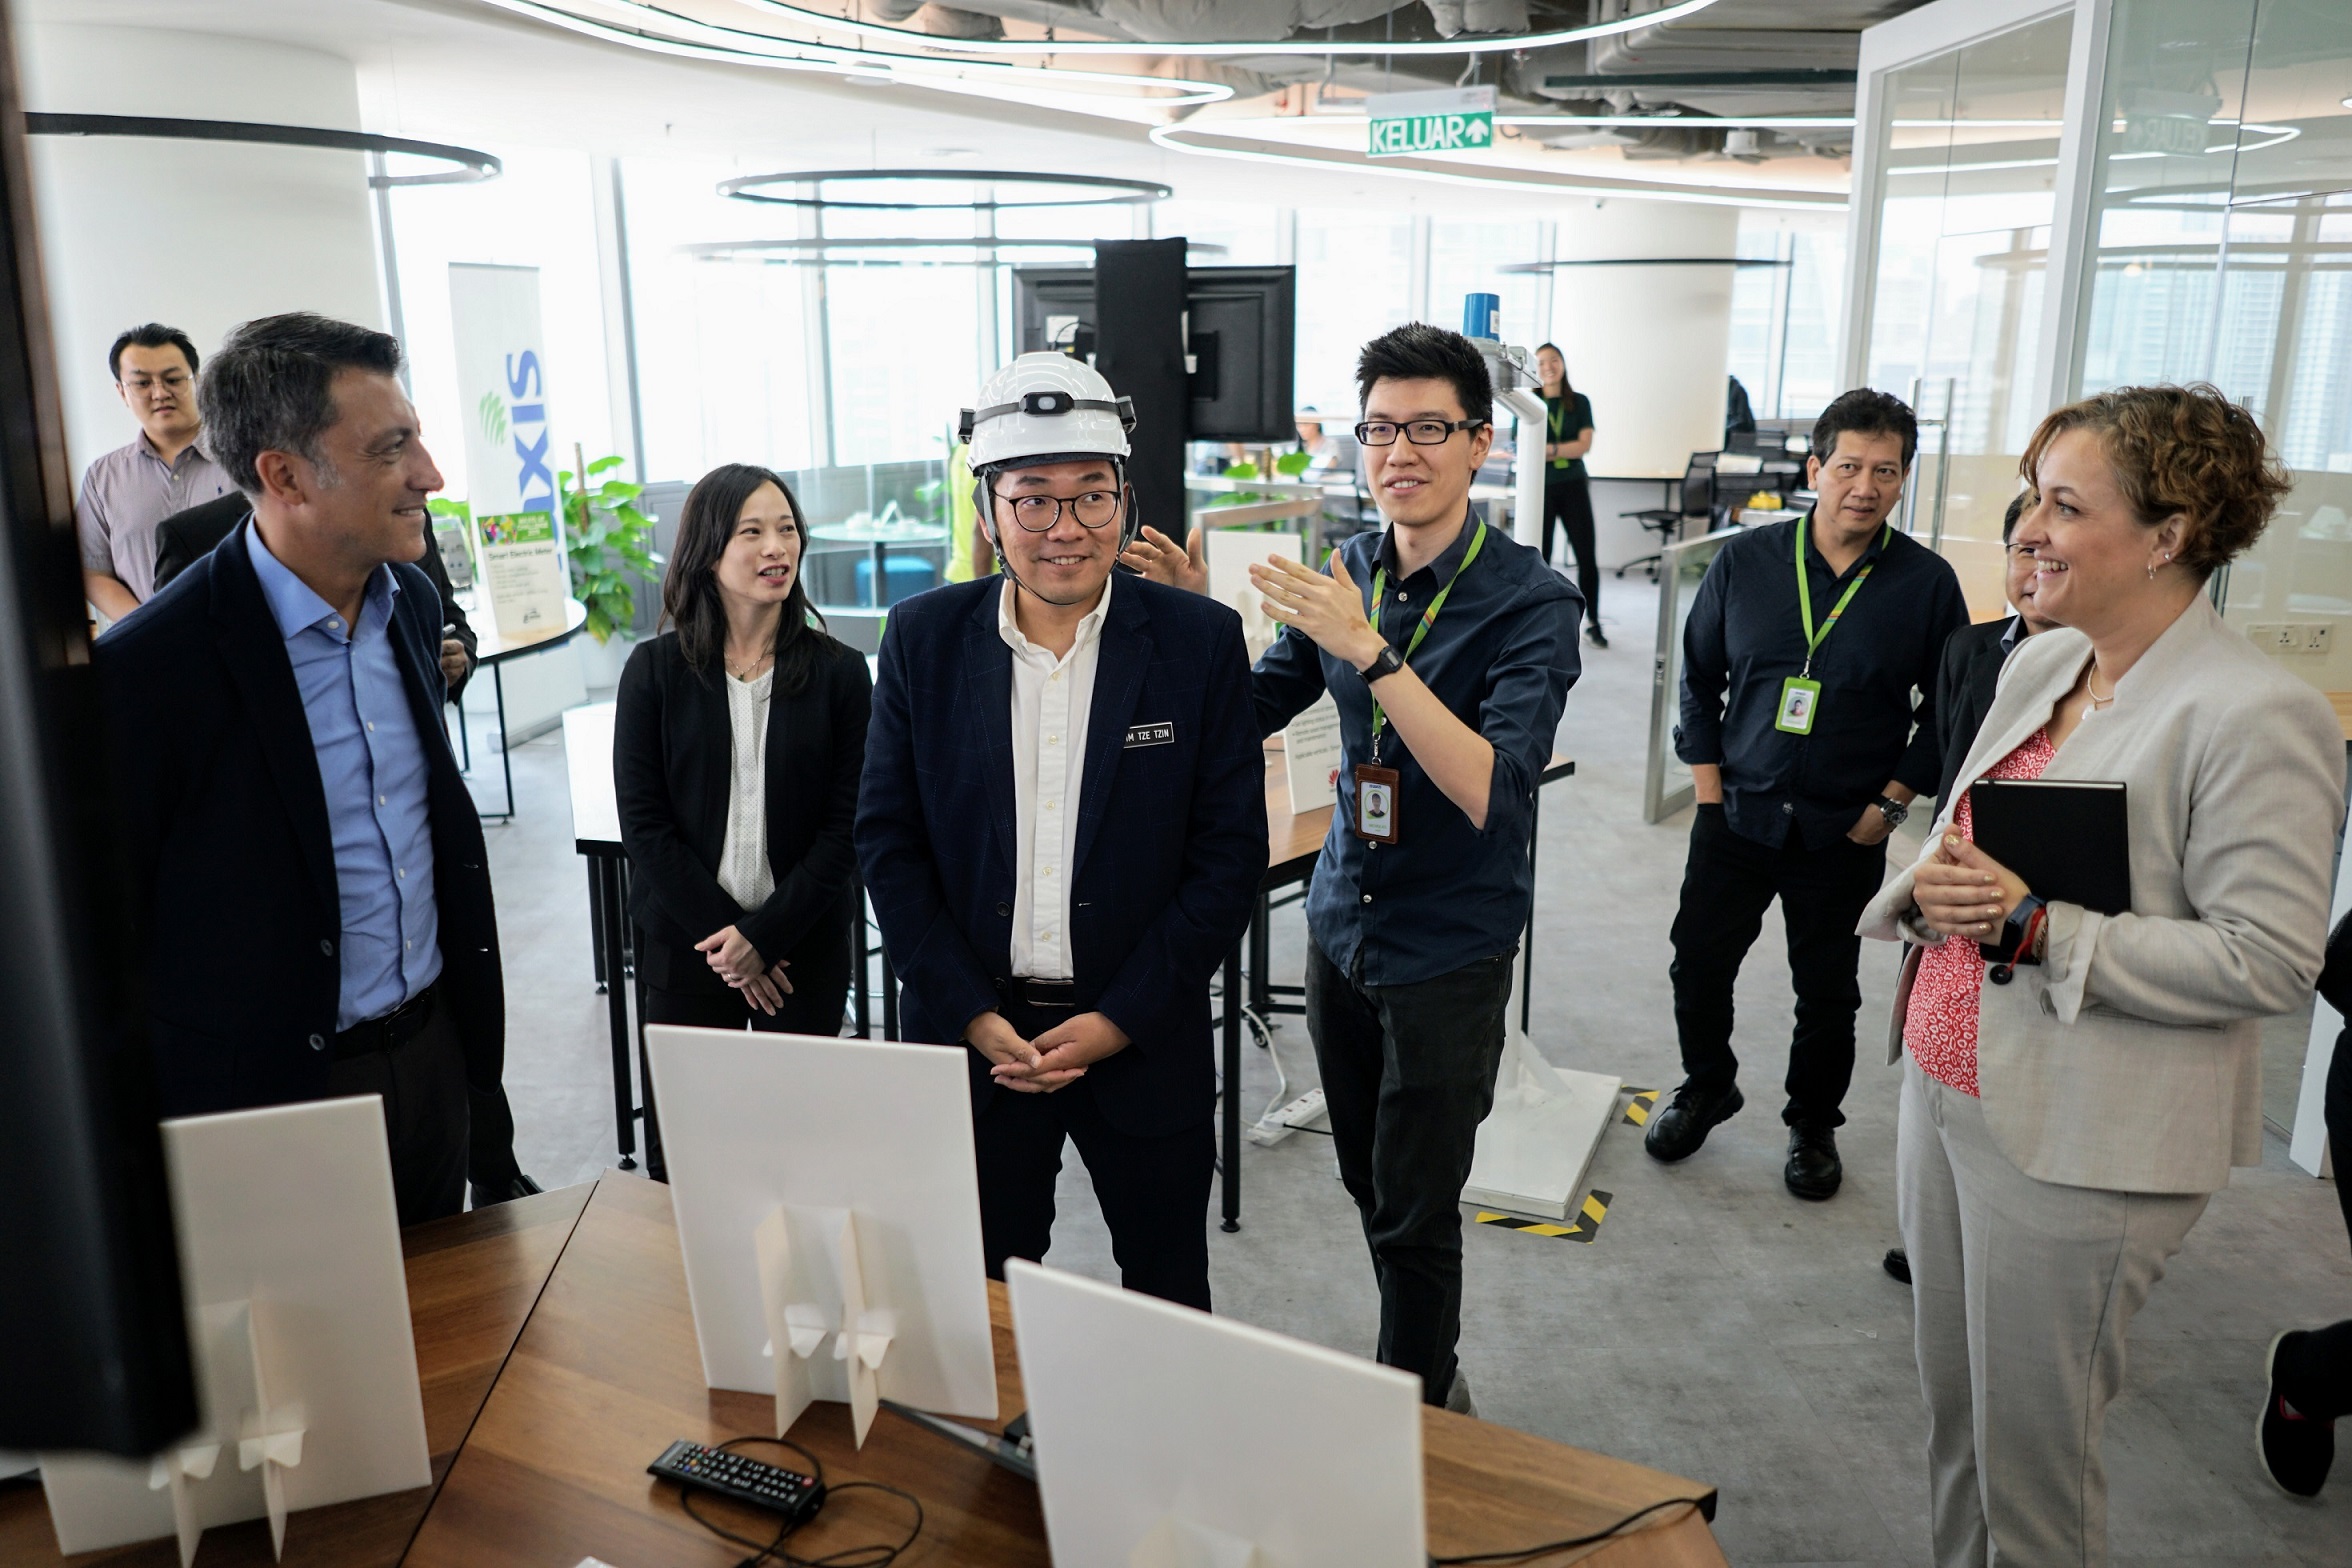 Maxis IoT Challenge inspires innovative and forward-thinking Malaysians